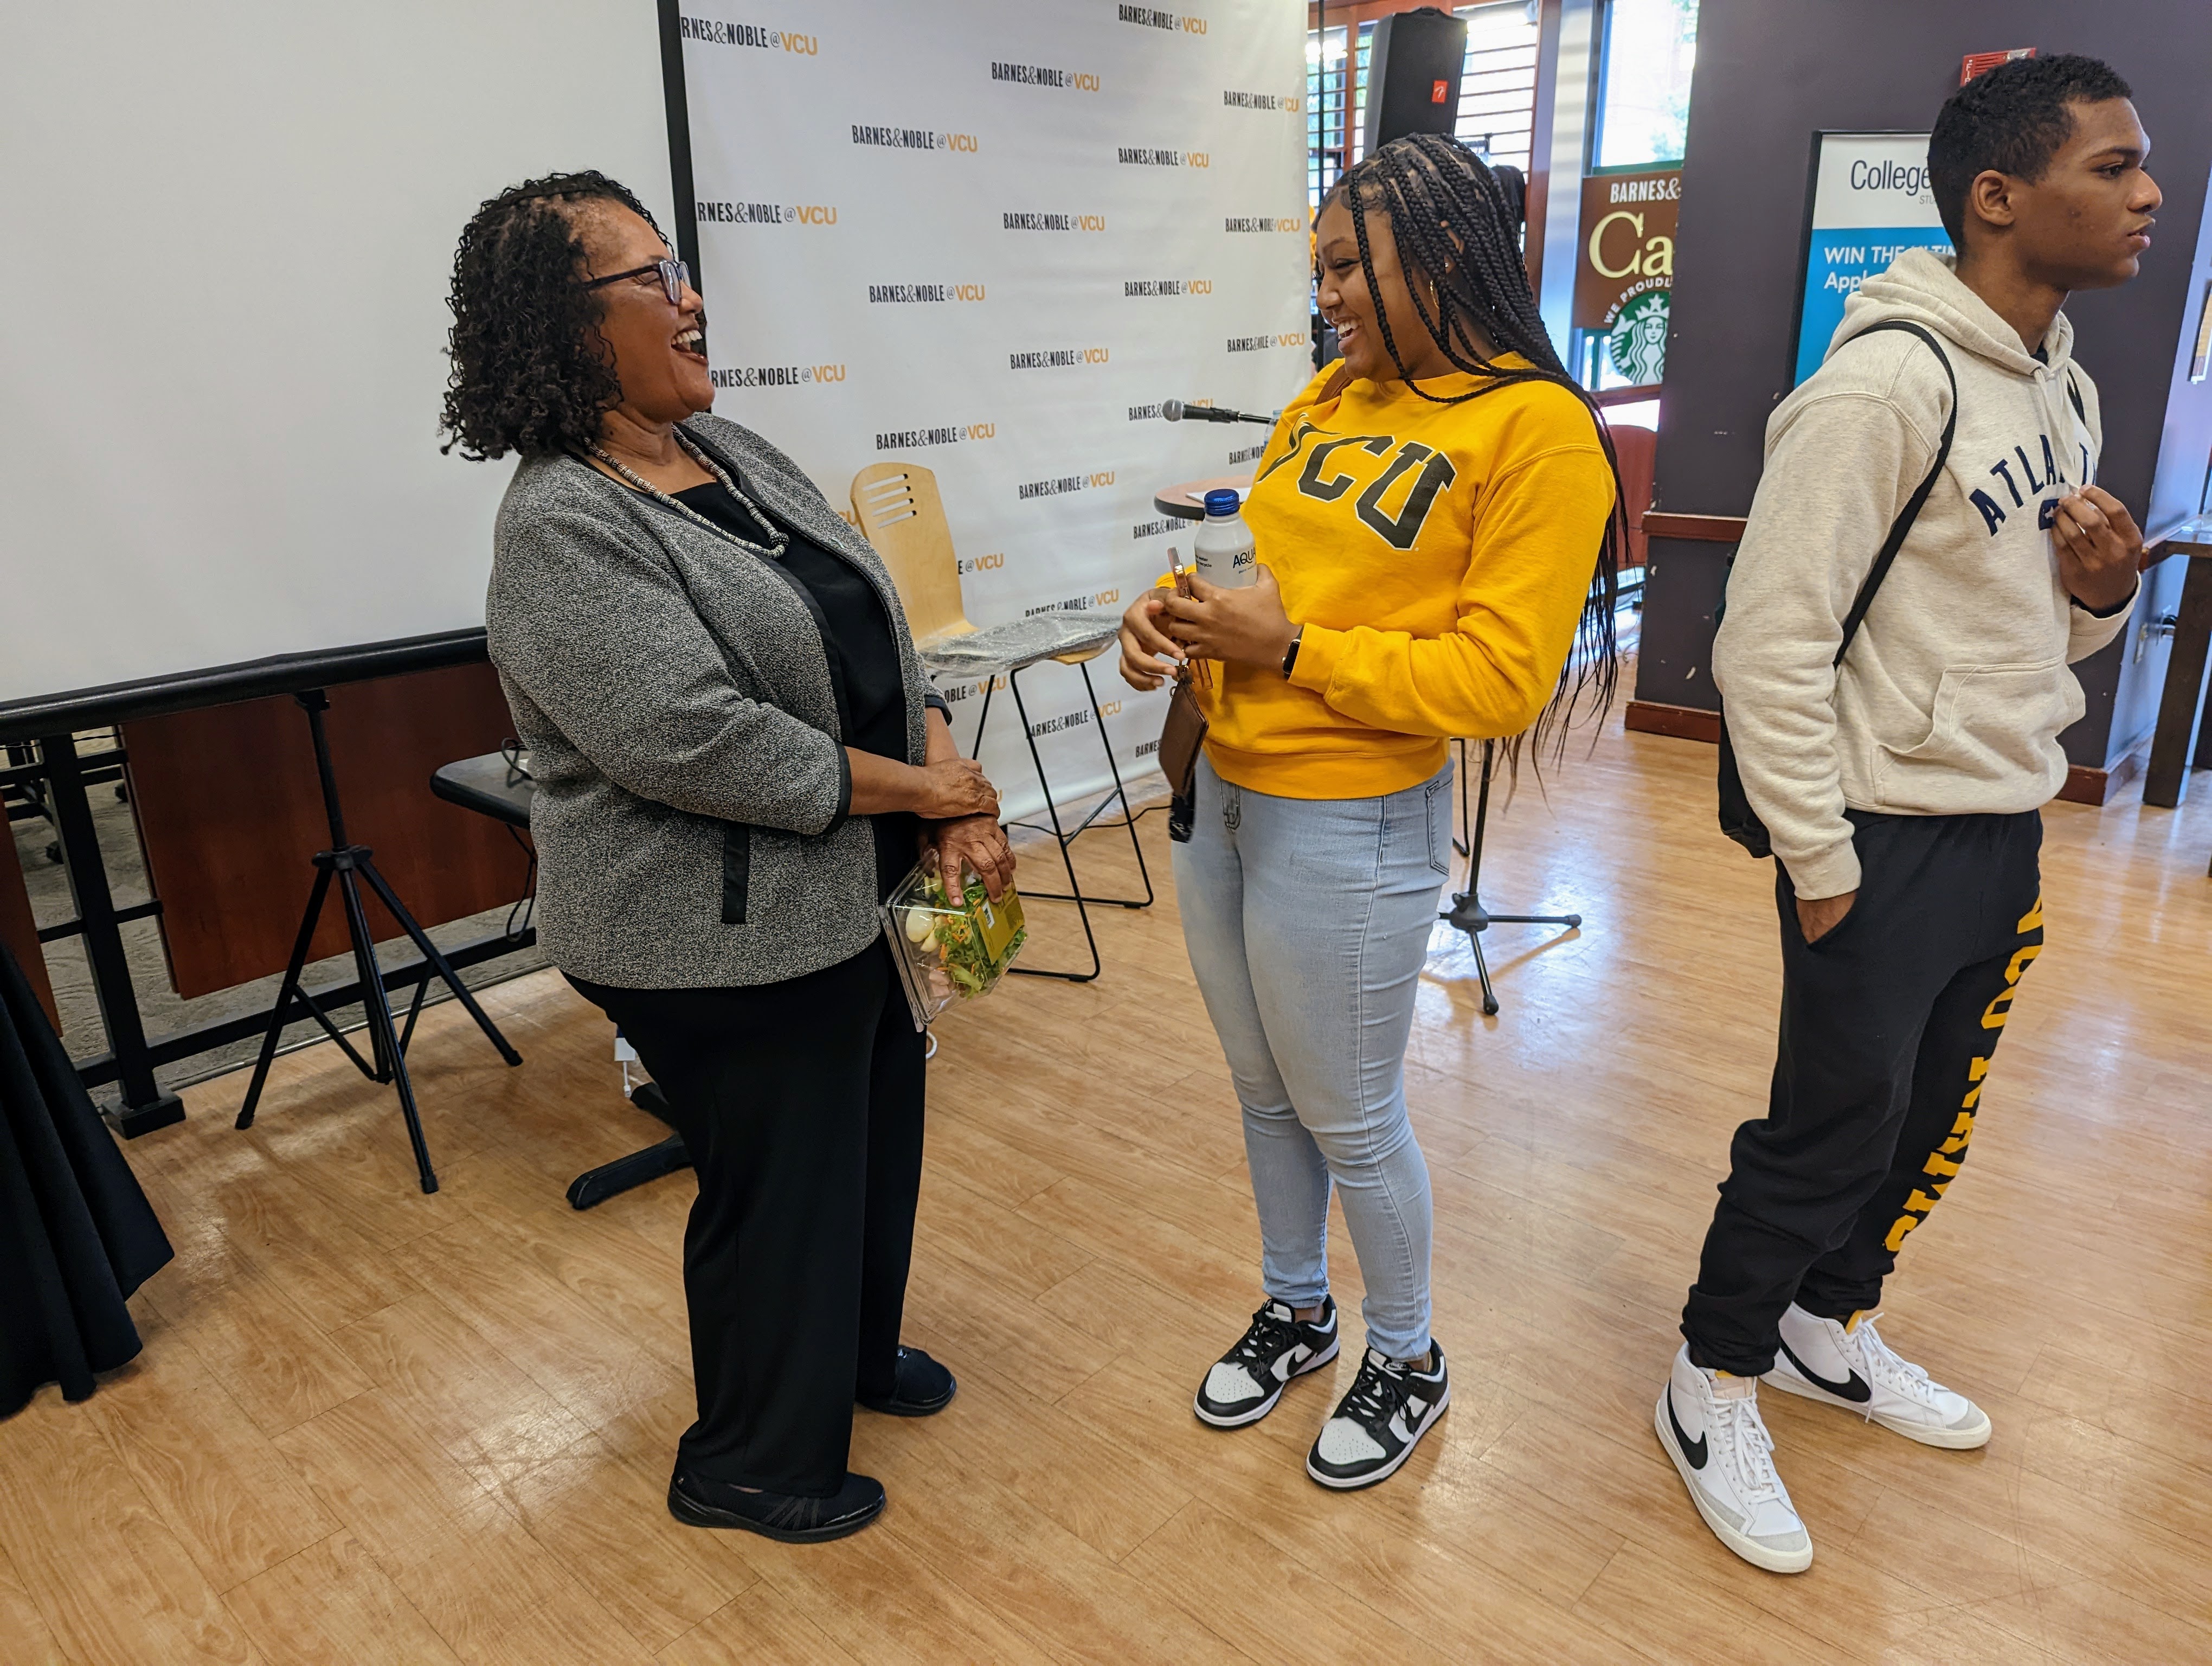 Dr. Belgrave laughs with a young person who attended her talk, presumably a student, Belgrave wears professional dress while the student wears a bright yellow and black VCU hoodie.